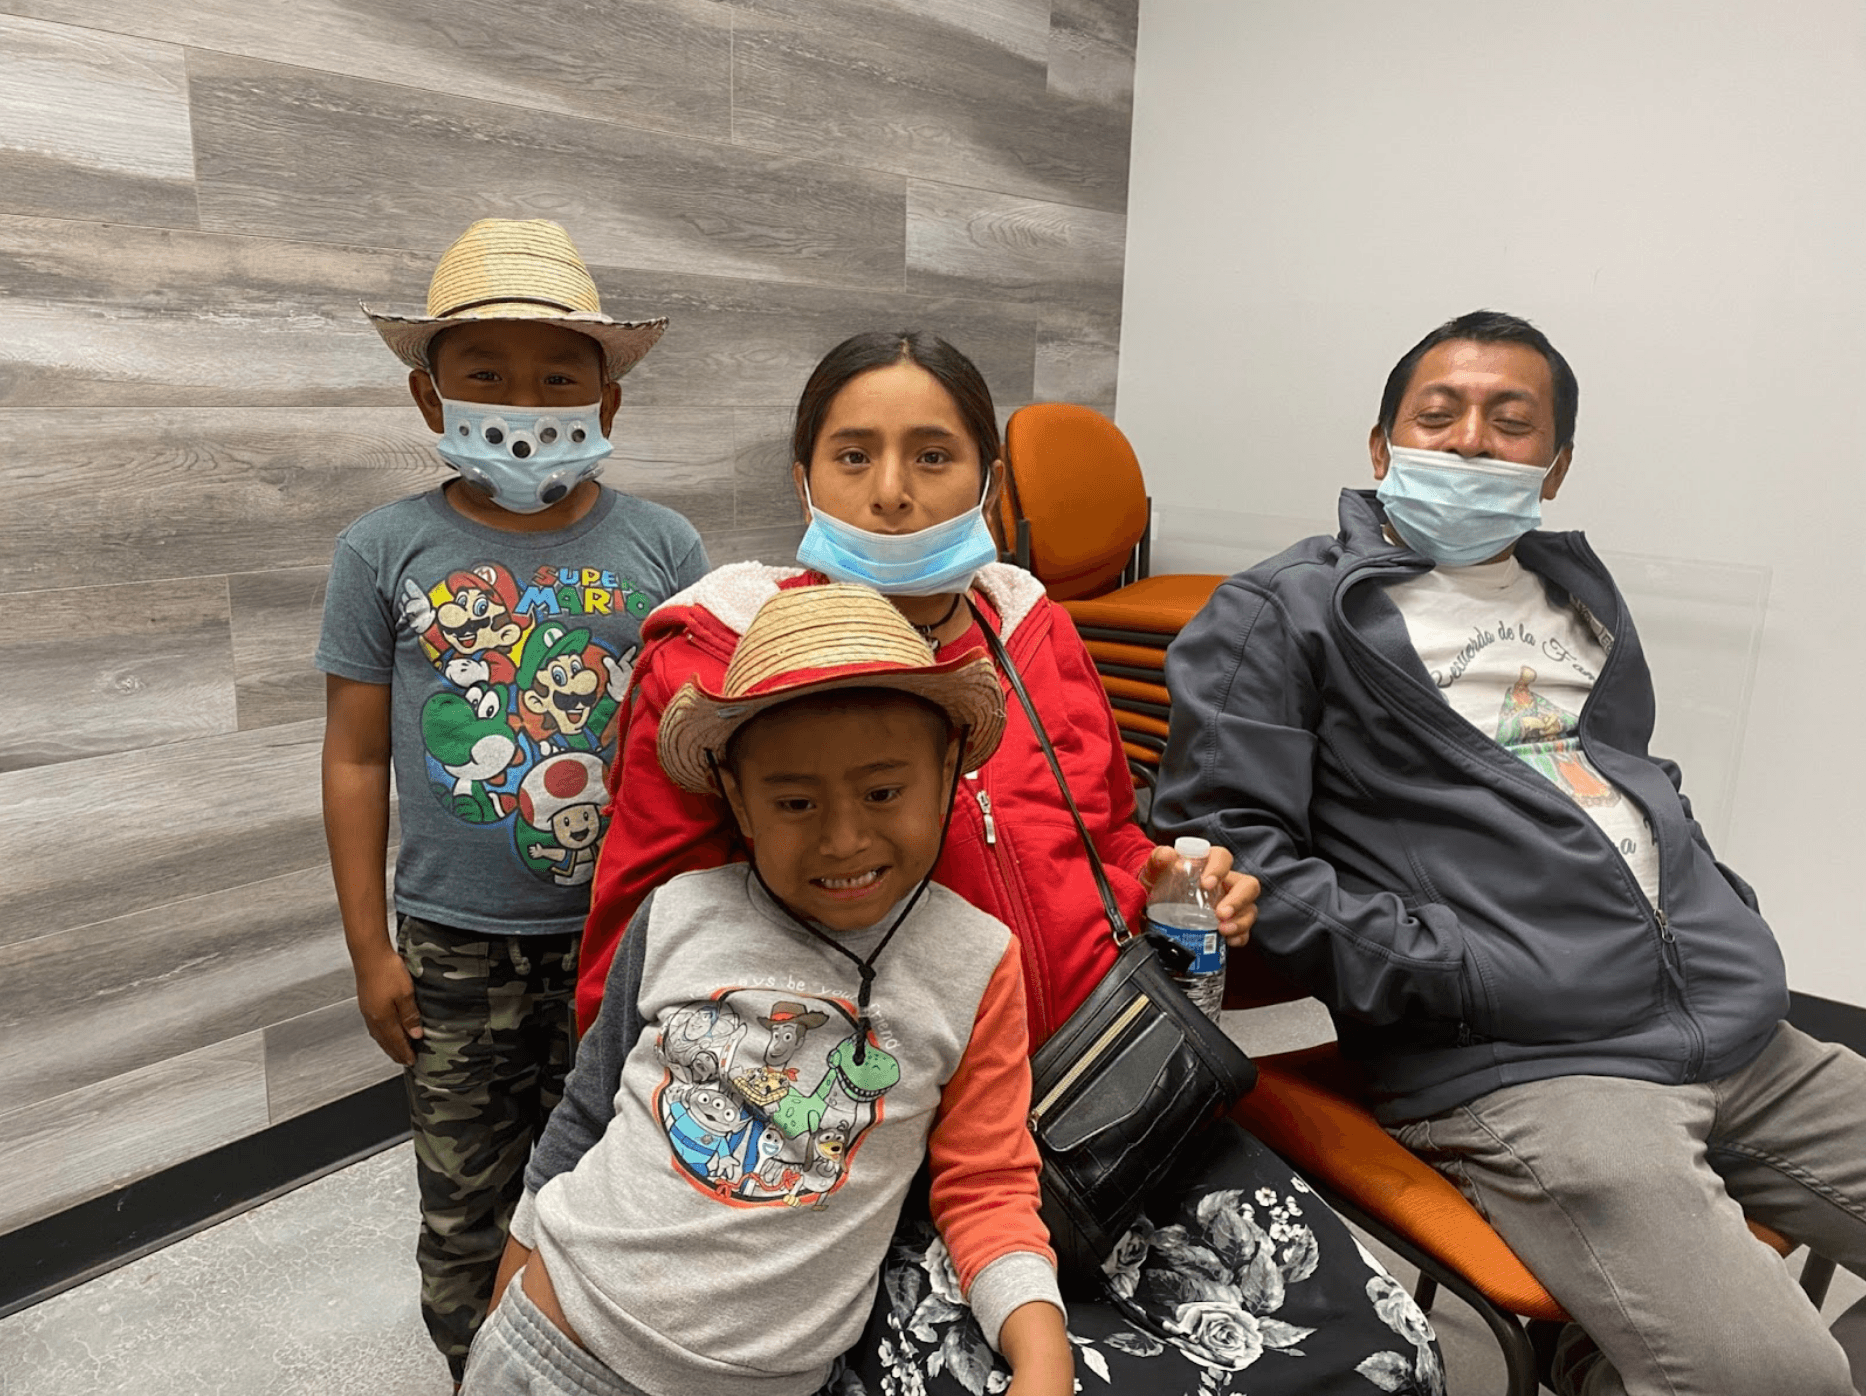 Guillermo and Augustina pictured with their children. They are undocumented California farm workers who said that food insecurity is a real issue for their family and people in the Indigenous farmworker community. May 2022